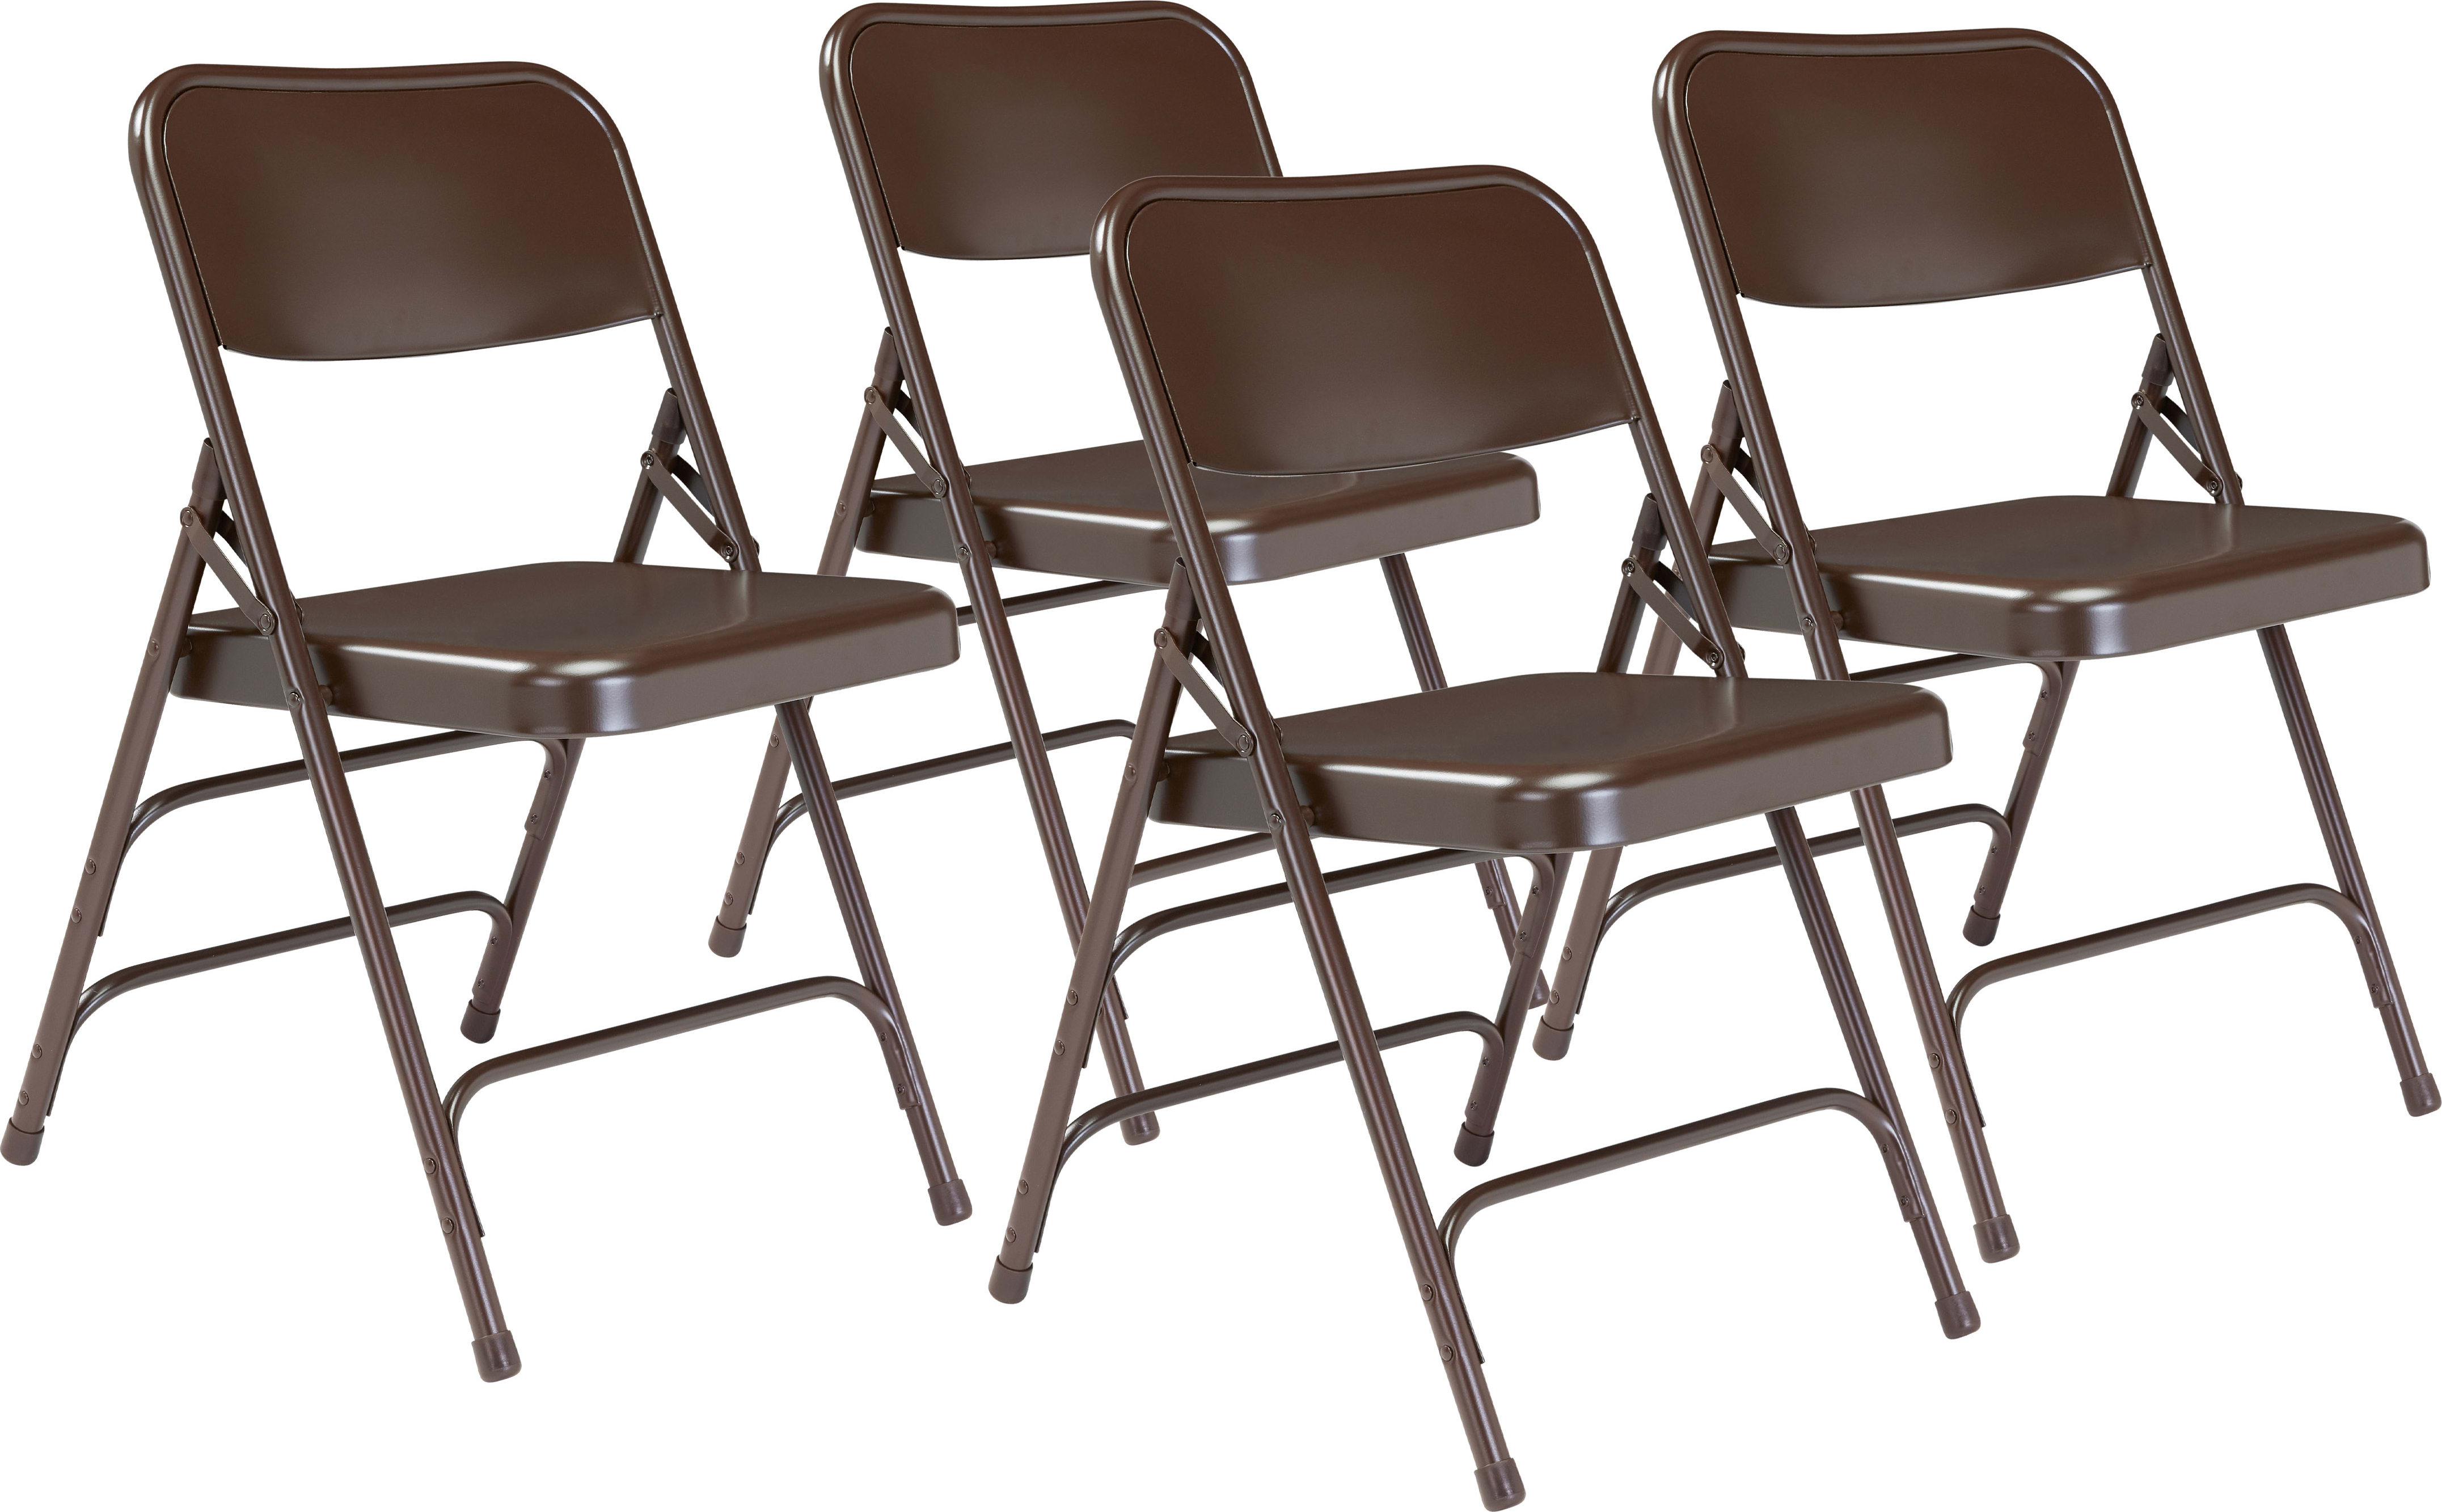 Oklahoma Sound 303 - NPS 300 Series Deluxe All-Steel Triple Brace Double Hinge Folding Chair, Brown (Pack of 4)